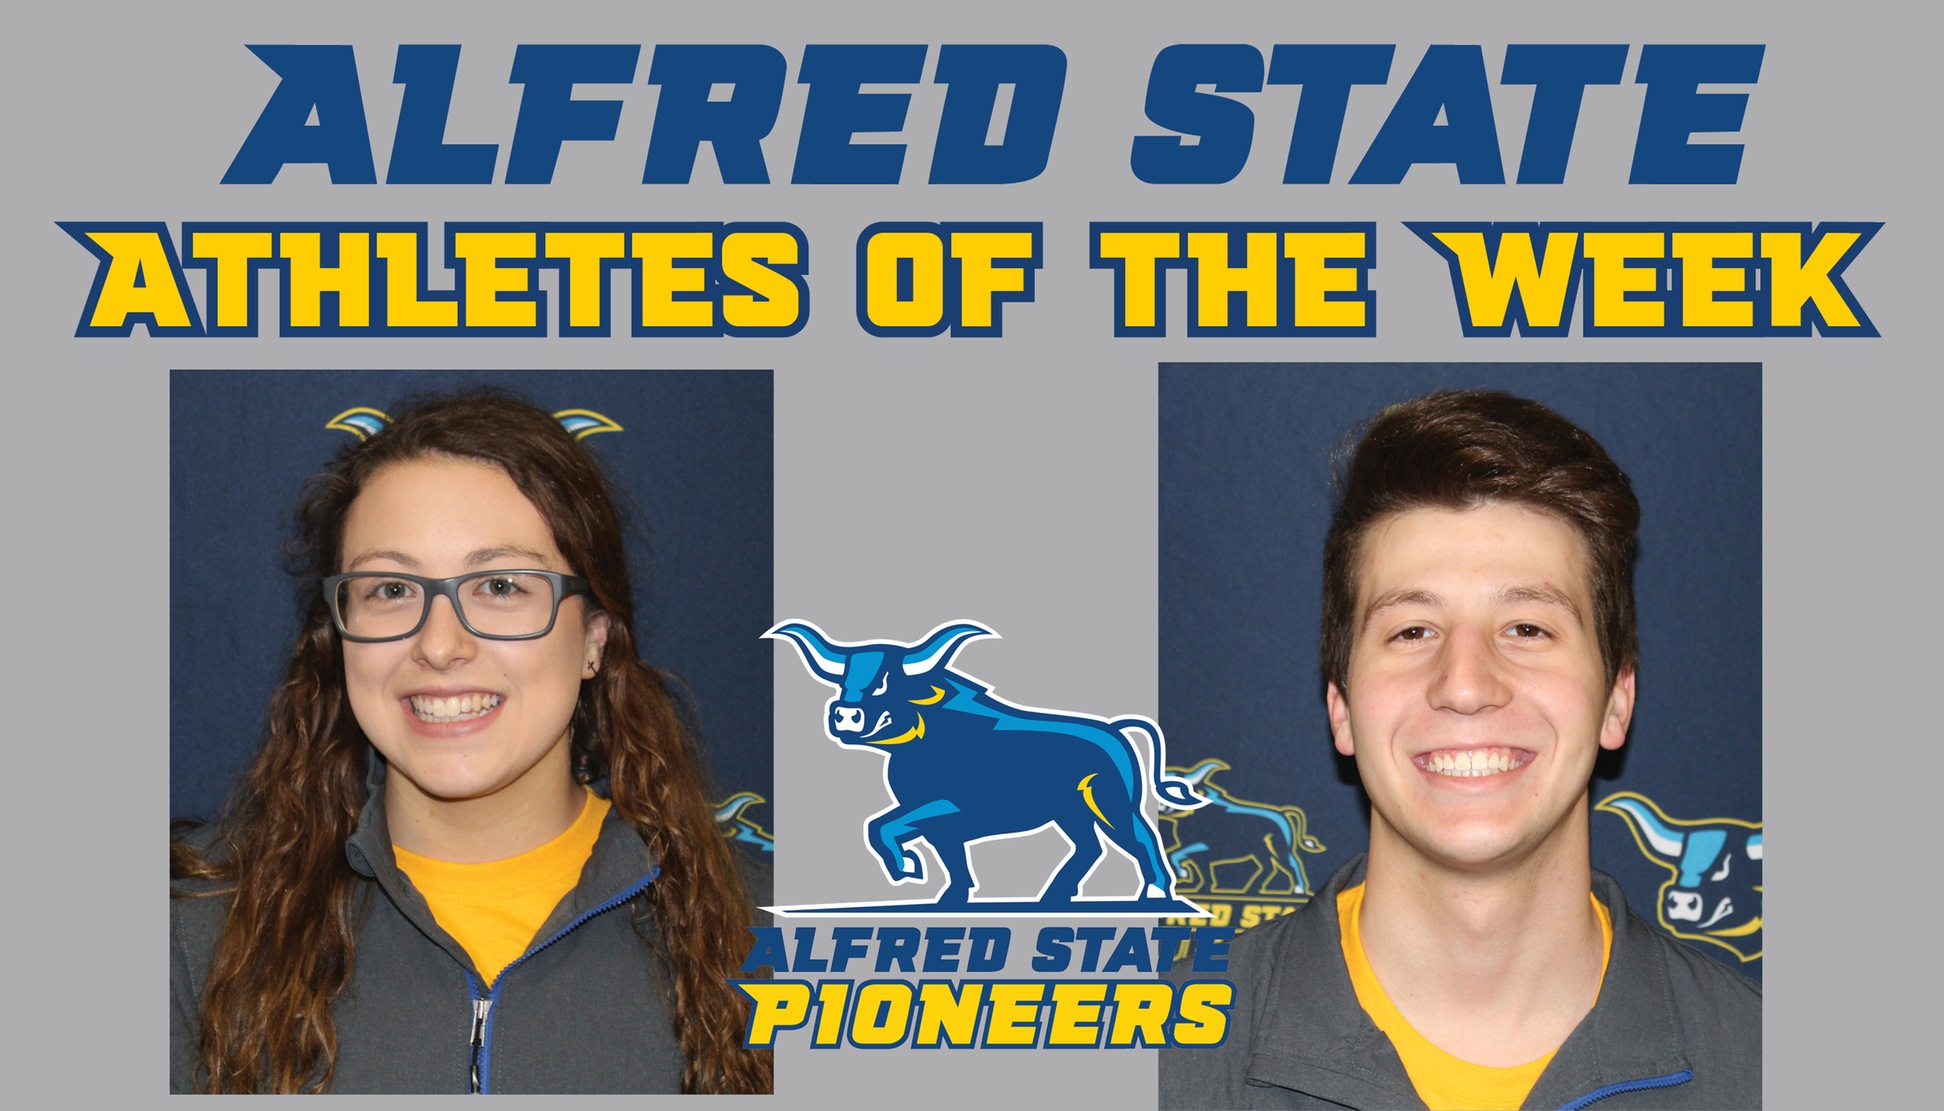 Kathryn Lewis and Ethan Dale Named Athletes of the Week